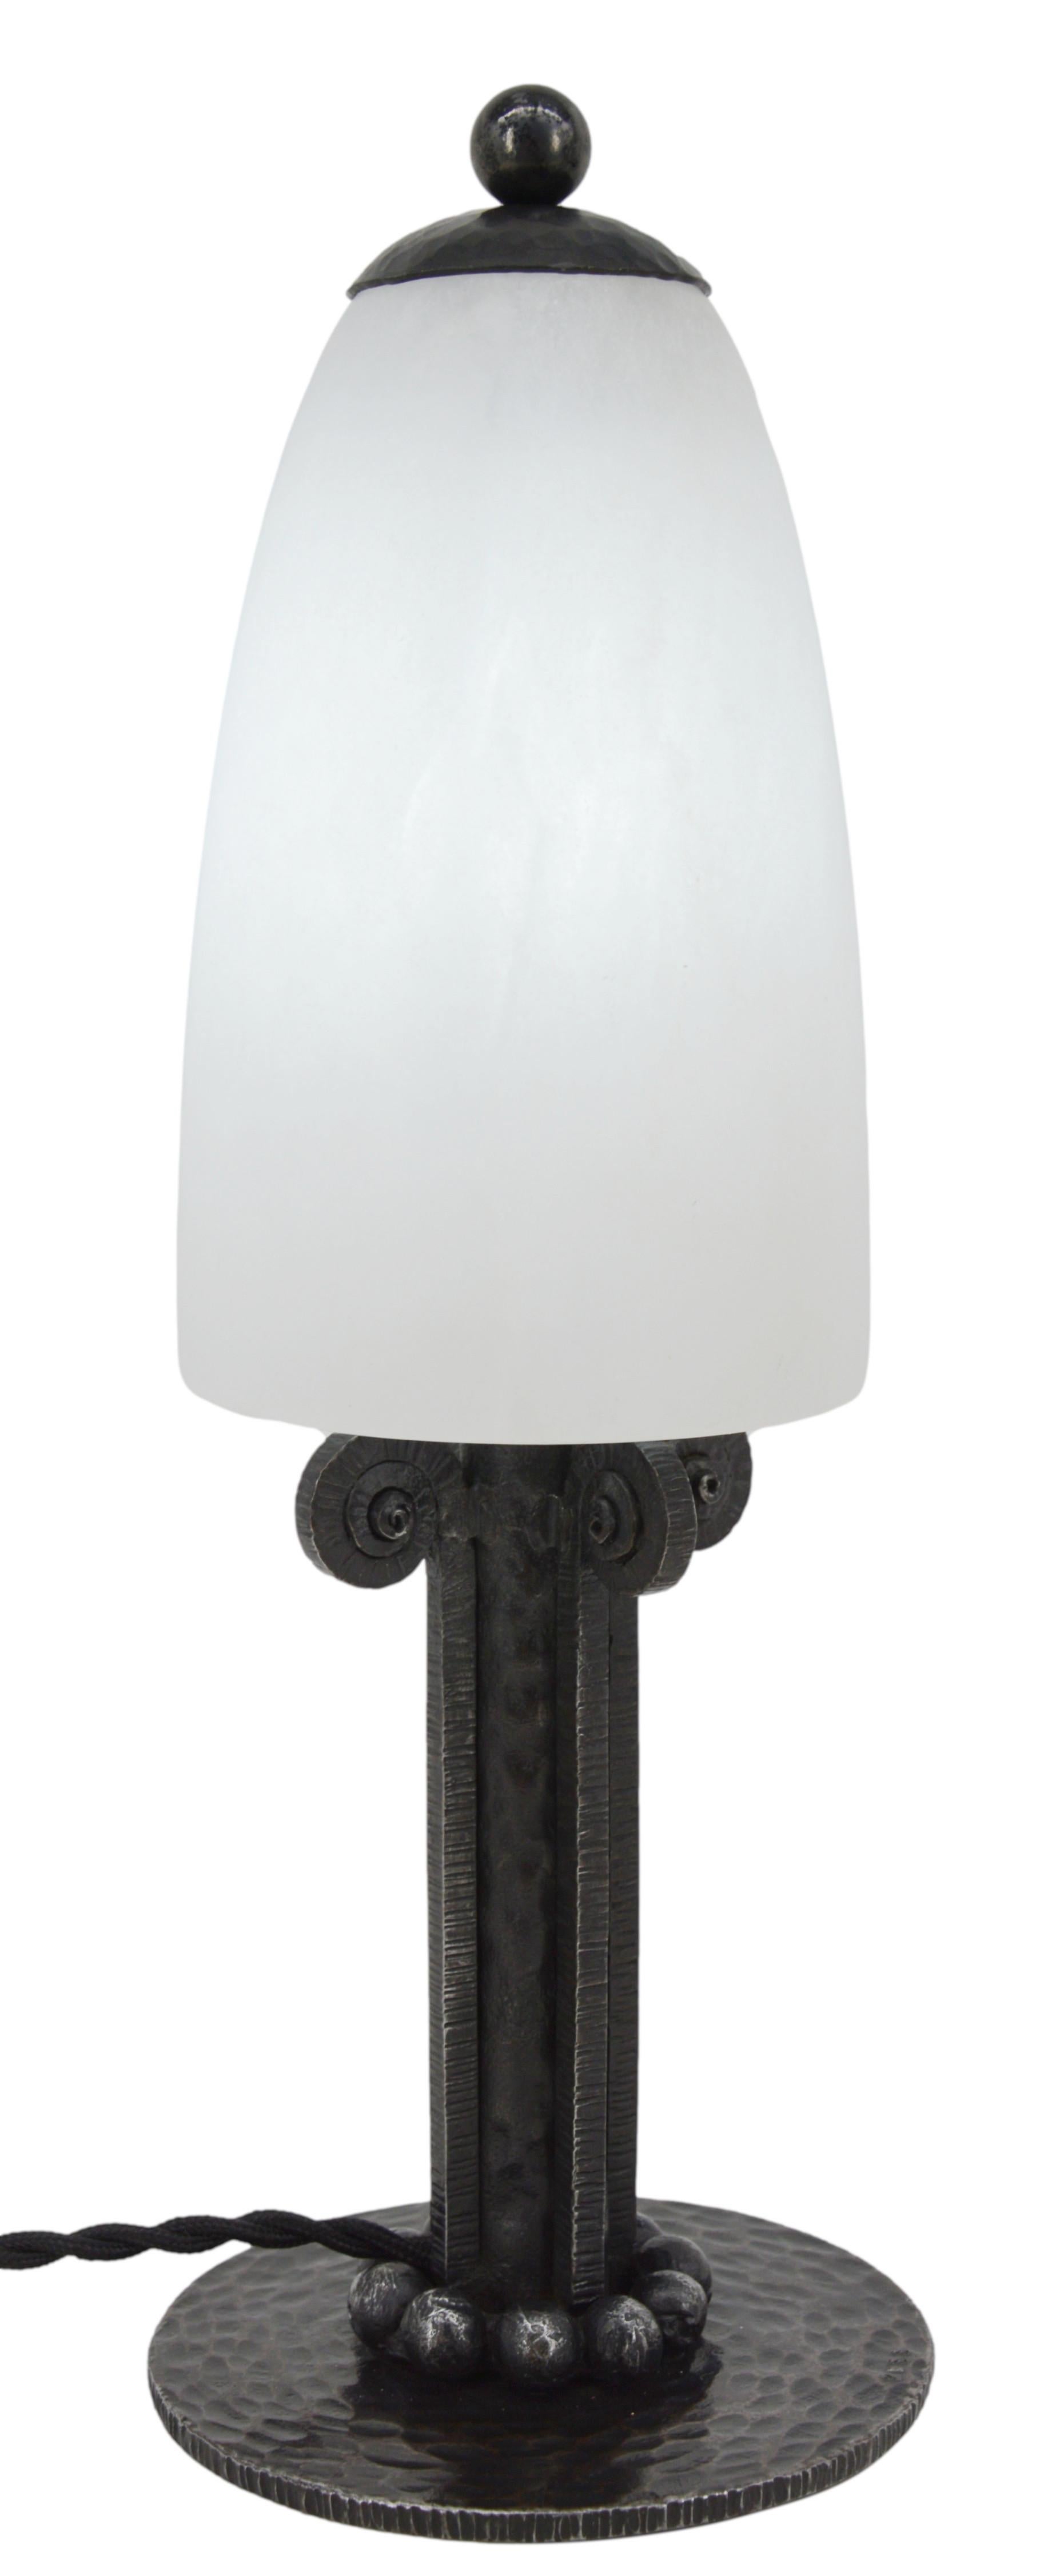 French Art Deco table lamp by Paul Kiss, France, 1920s. Alabaster & wrought-iron. Old alabaster cannot be compared to new ones. Old alabaster has veins. Sometimes they can be mistaken for cracks. But they are not cracks, they are veins. Height: